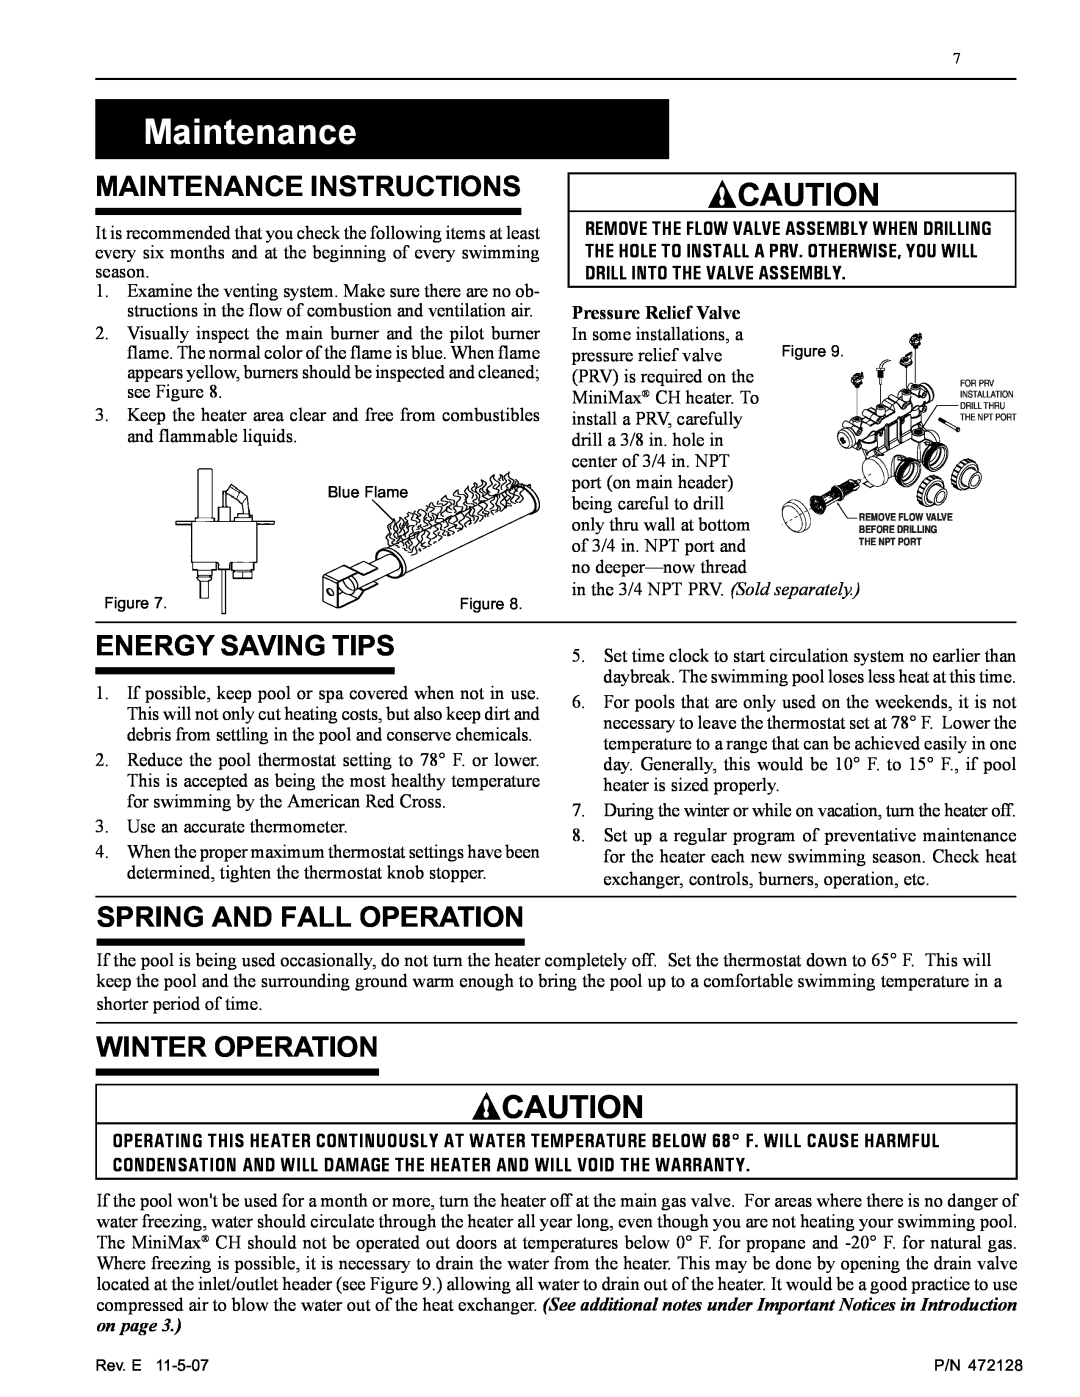 Pentair Hot Tub manual Maintenance Instructions, Energy Saving Tips, Spring And Fall Operation, Winter Operation 